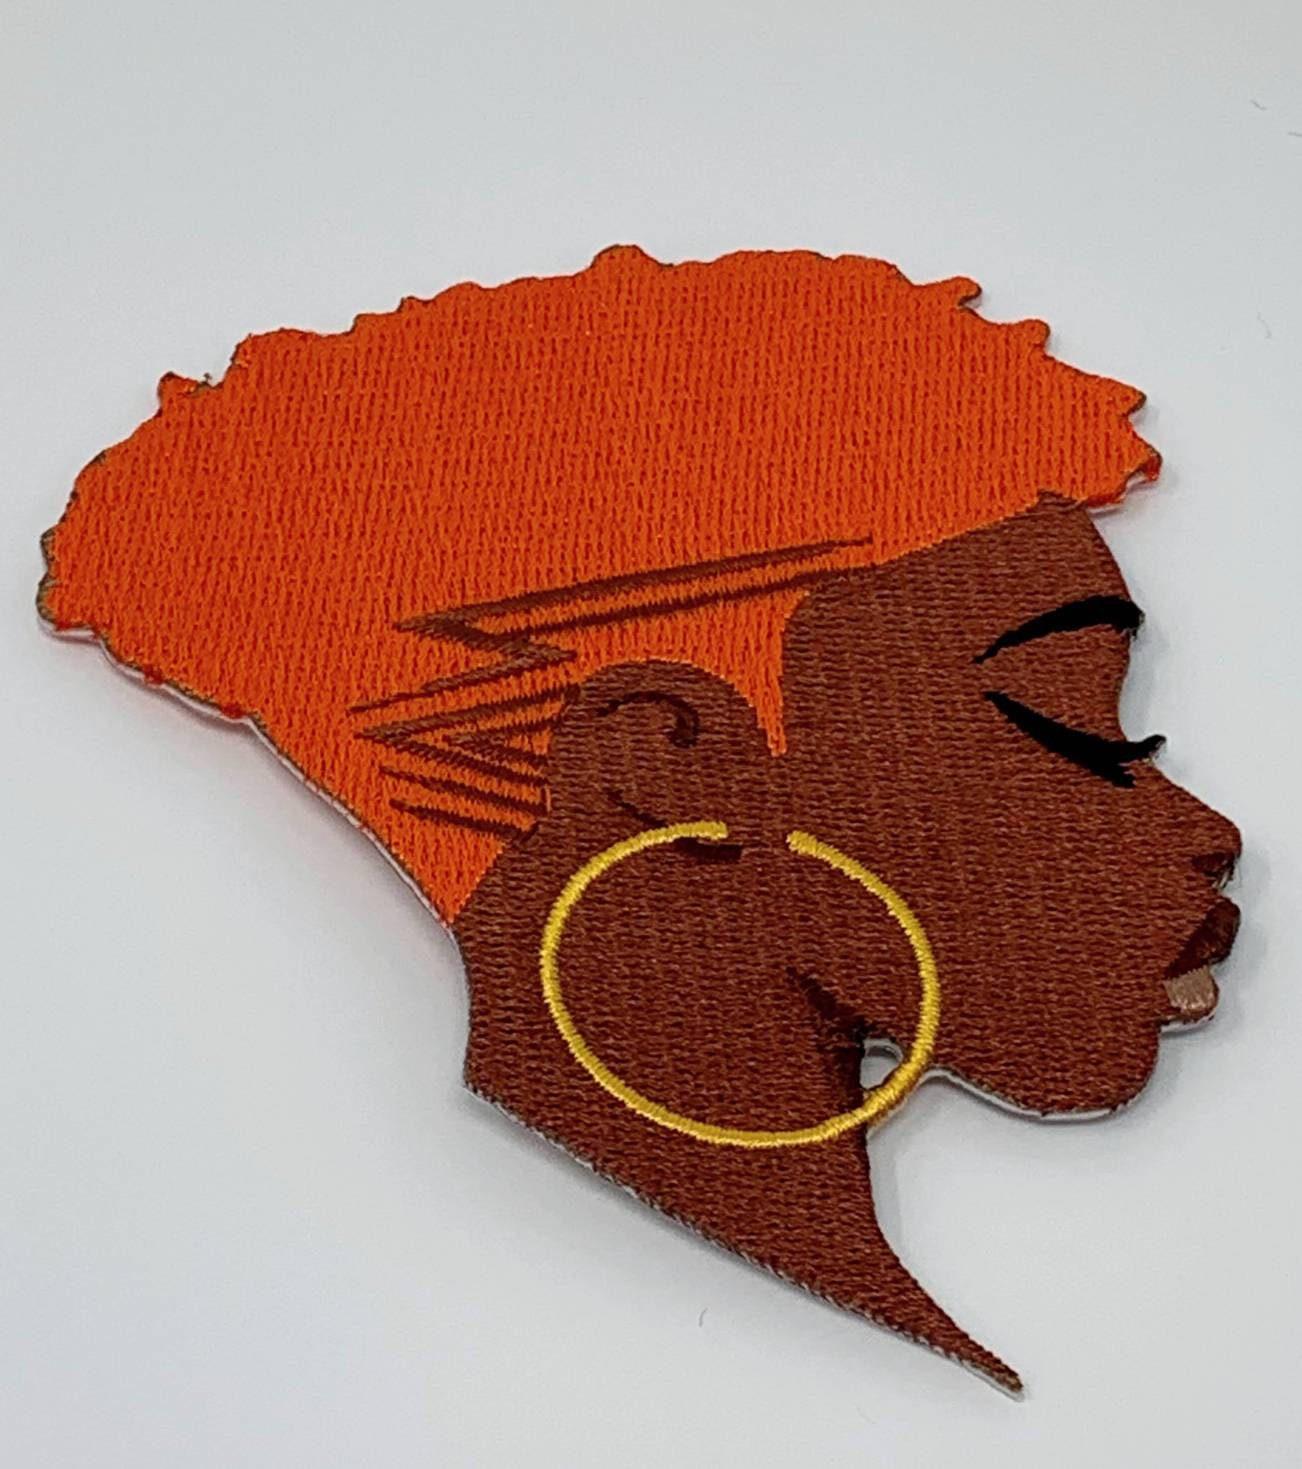 Iron-on Patch "Orange Hair, Don't Care" Size 4" Embroidery Patch; Black Girl Magic with Gold Hoops; Patch for Jackets and Accessories